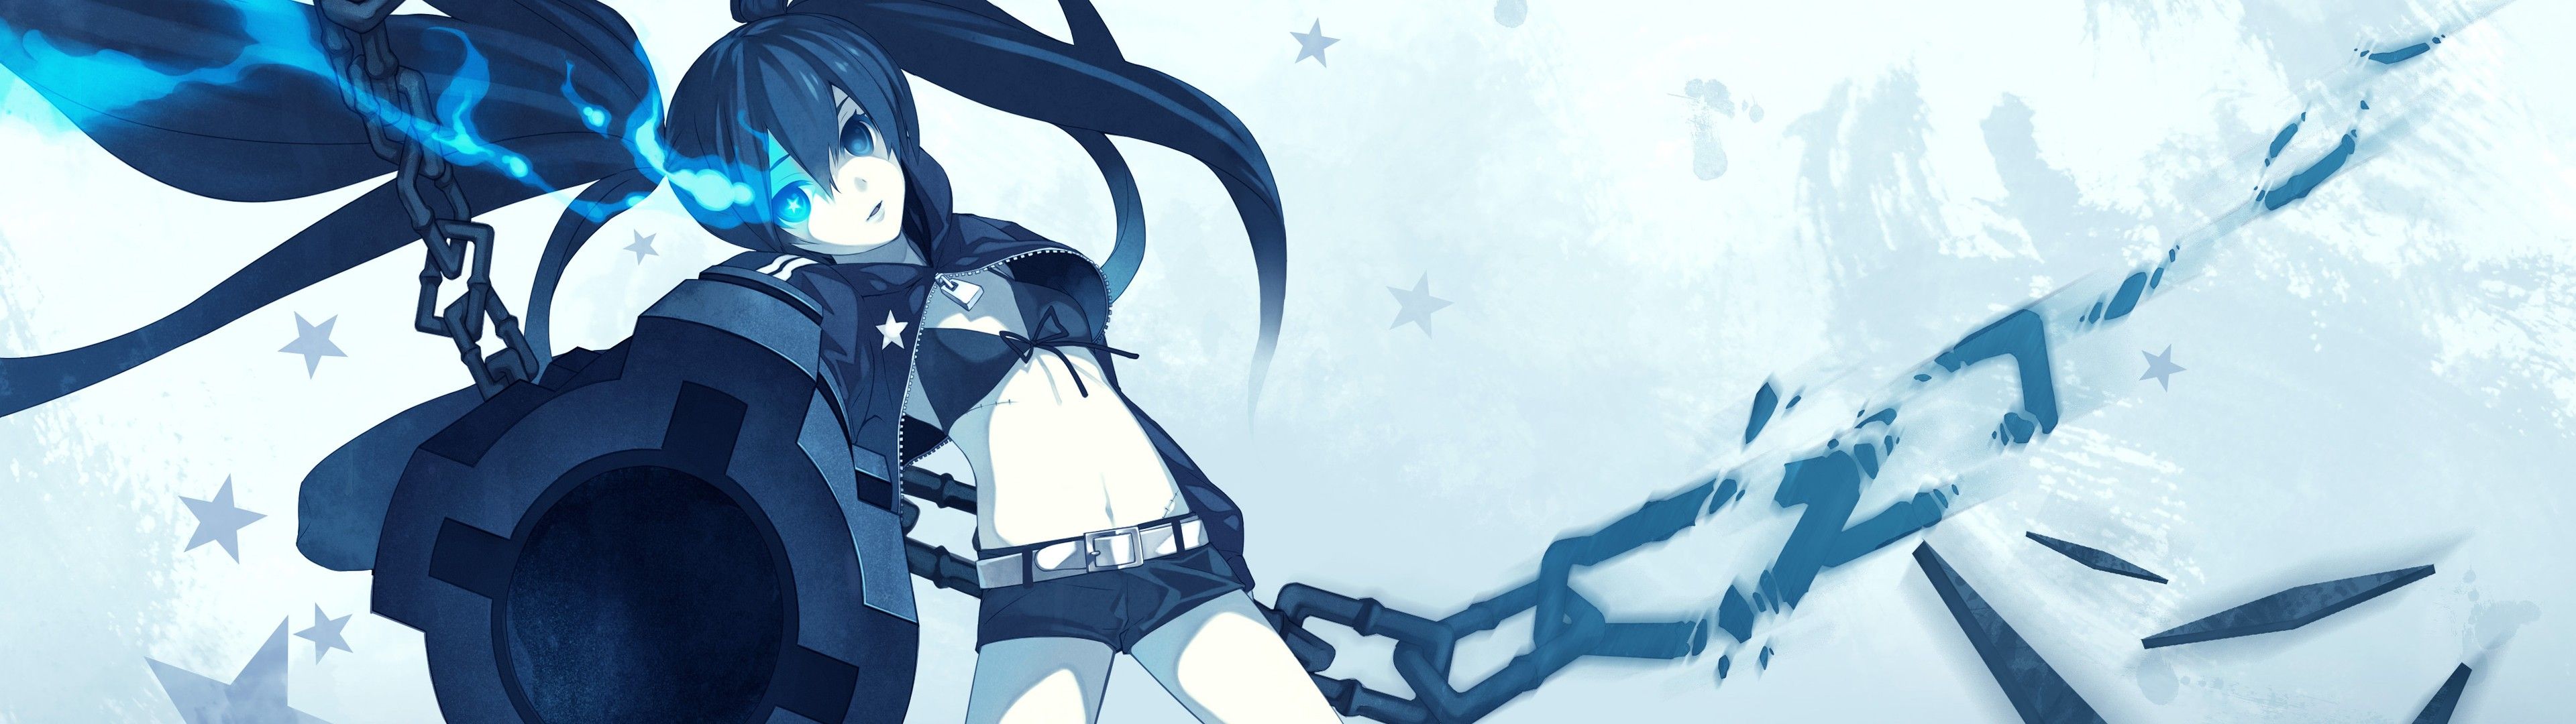 Anime 3840x1080 Wallpapers Wallpaper Cave